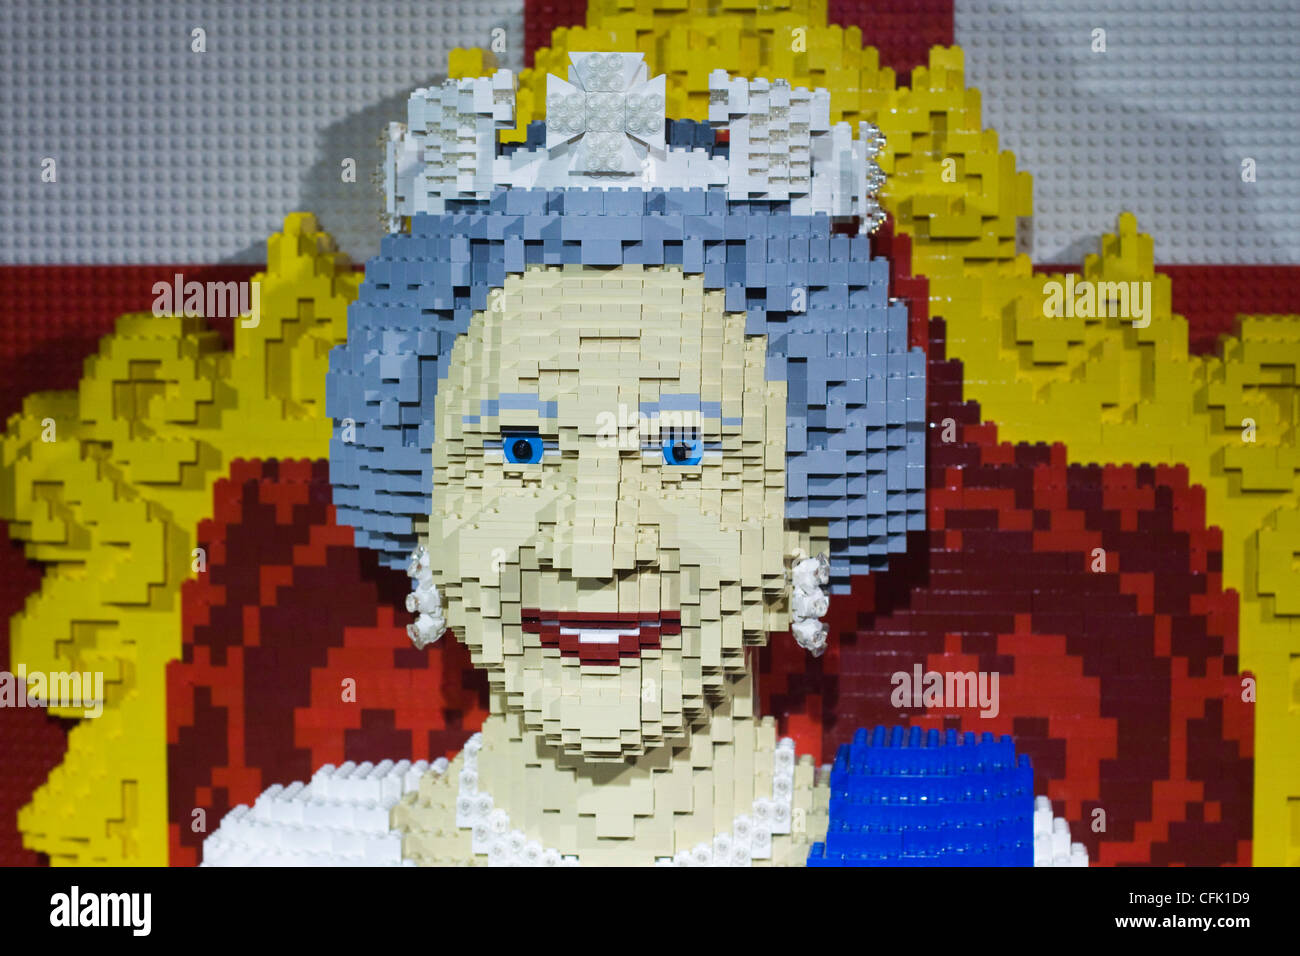 The Queen of England made out of Lego in London England Stock Photo